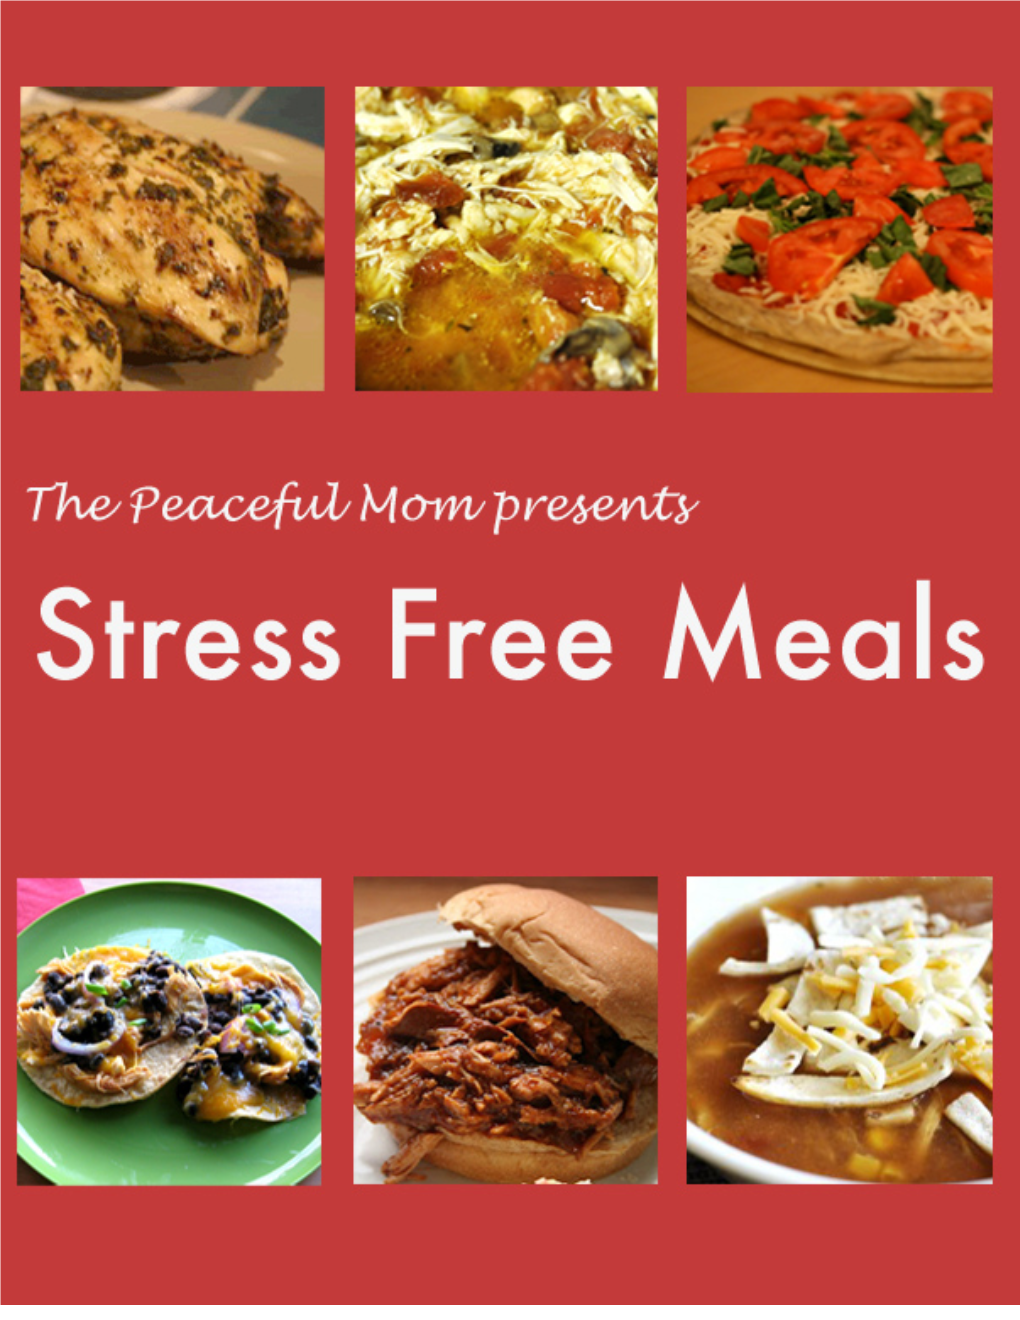 Pages Stress Free Meals Draft 8:24